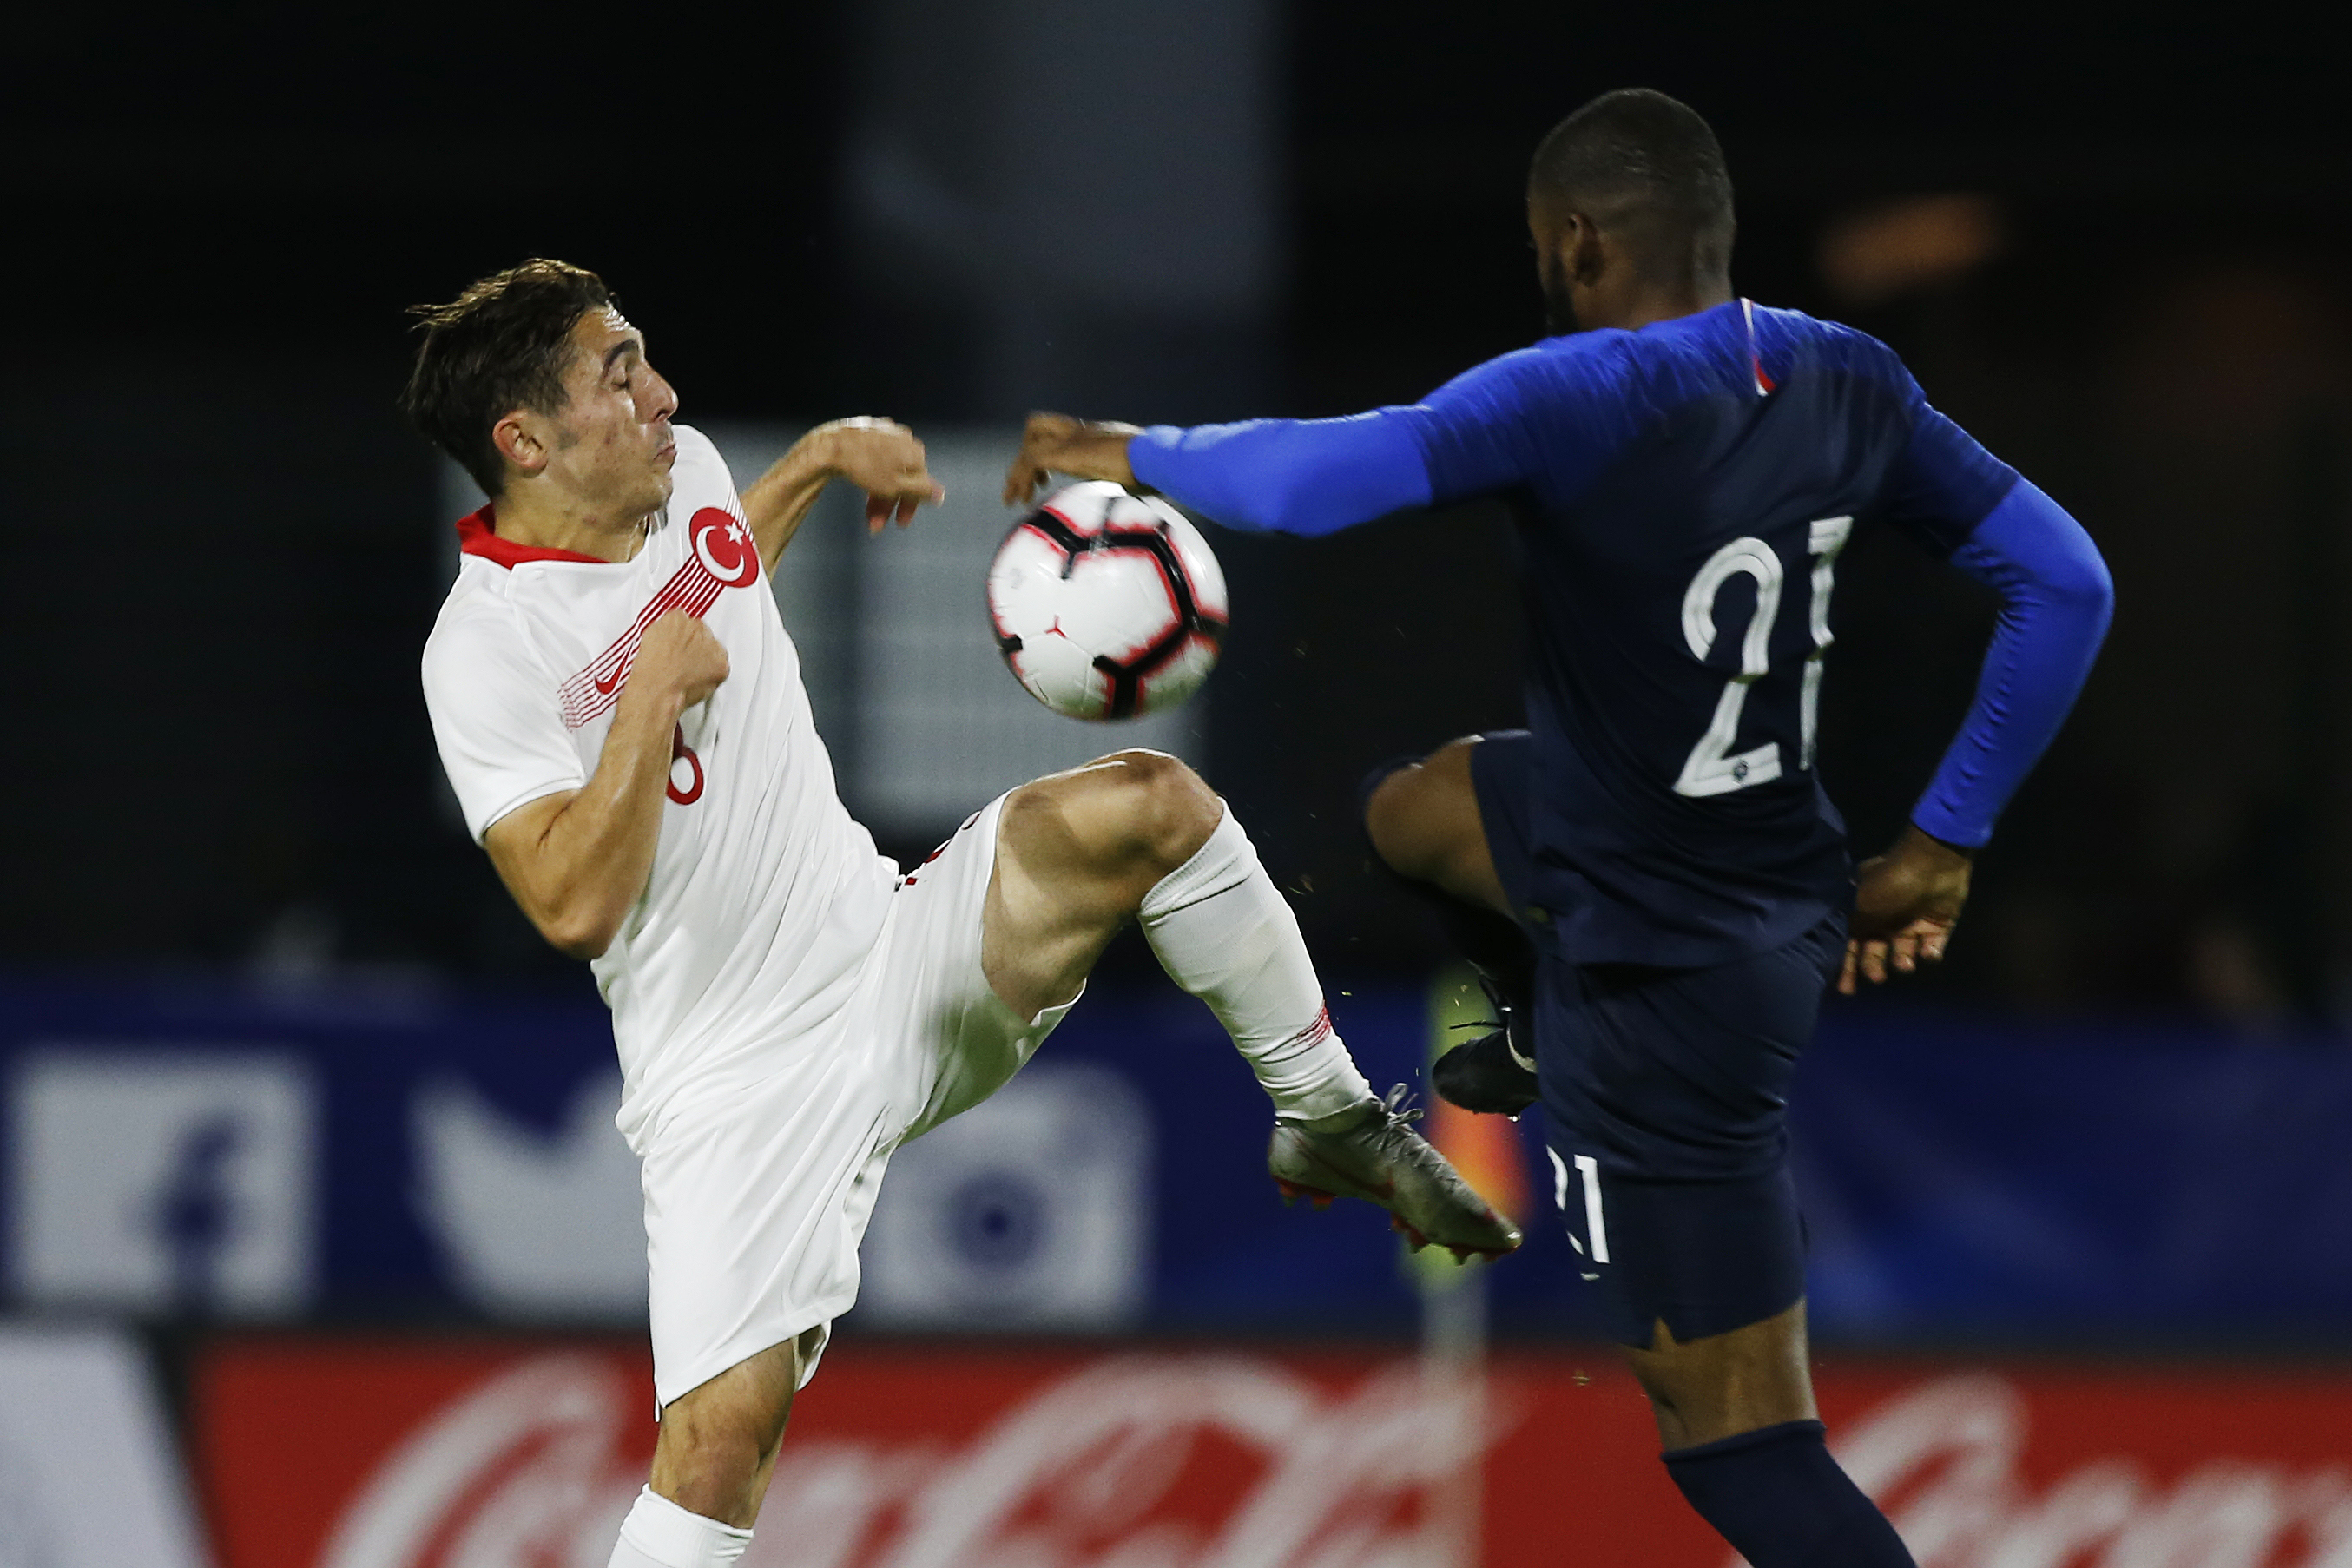 Turkey's midfielder Abdulkadir Omur vies for the ball with France's midfielder Olivier Ntcham during the friendly under-21 football match between France and Turkey at the Robert Diochon stadium in the northwestern city of Le Petit-Quevilly, northwestern France on October 12, 2018. (Photo by CHARLY TRIBALLEAU / AFP)        (Photo credit should read CHARLY TRIBALLEAU/AFP/Getty Images)